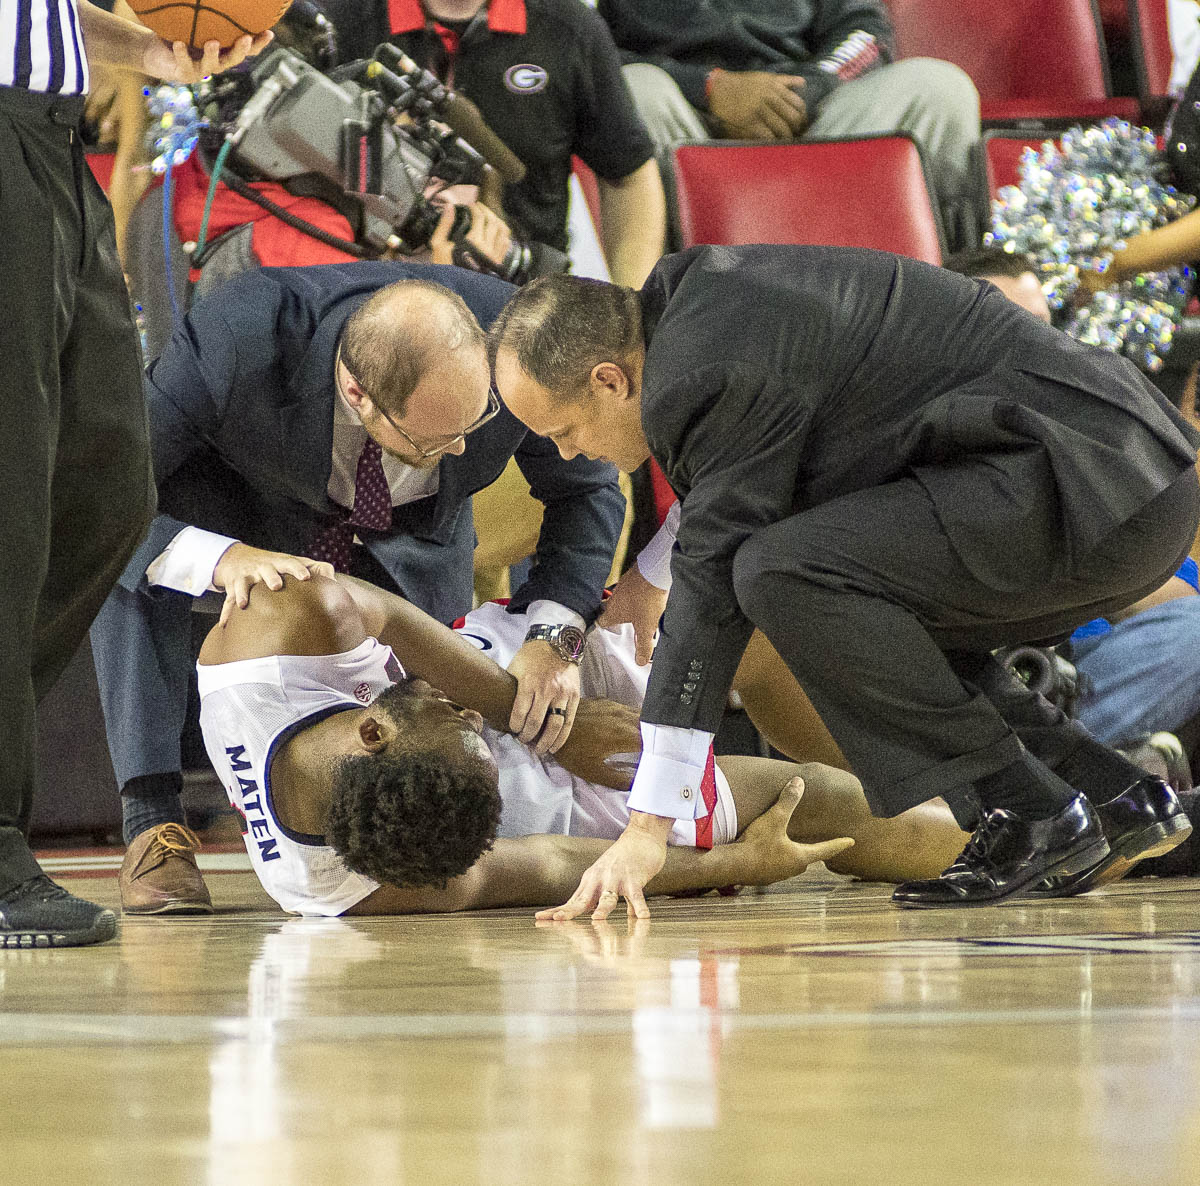 Coach Mark Fox and staff console Yante Maten (1) after he goes down with a leg injury early in the game versus Kentucky